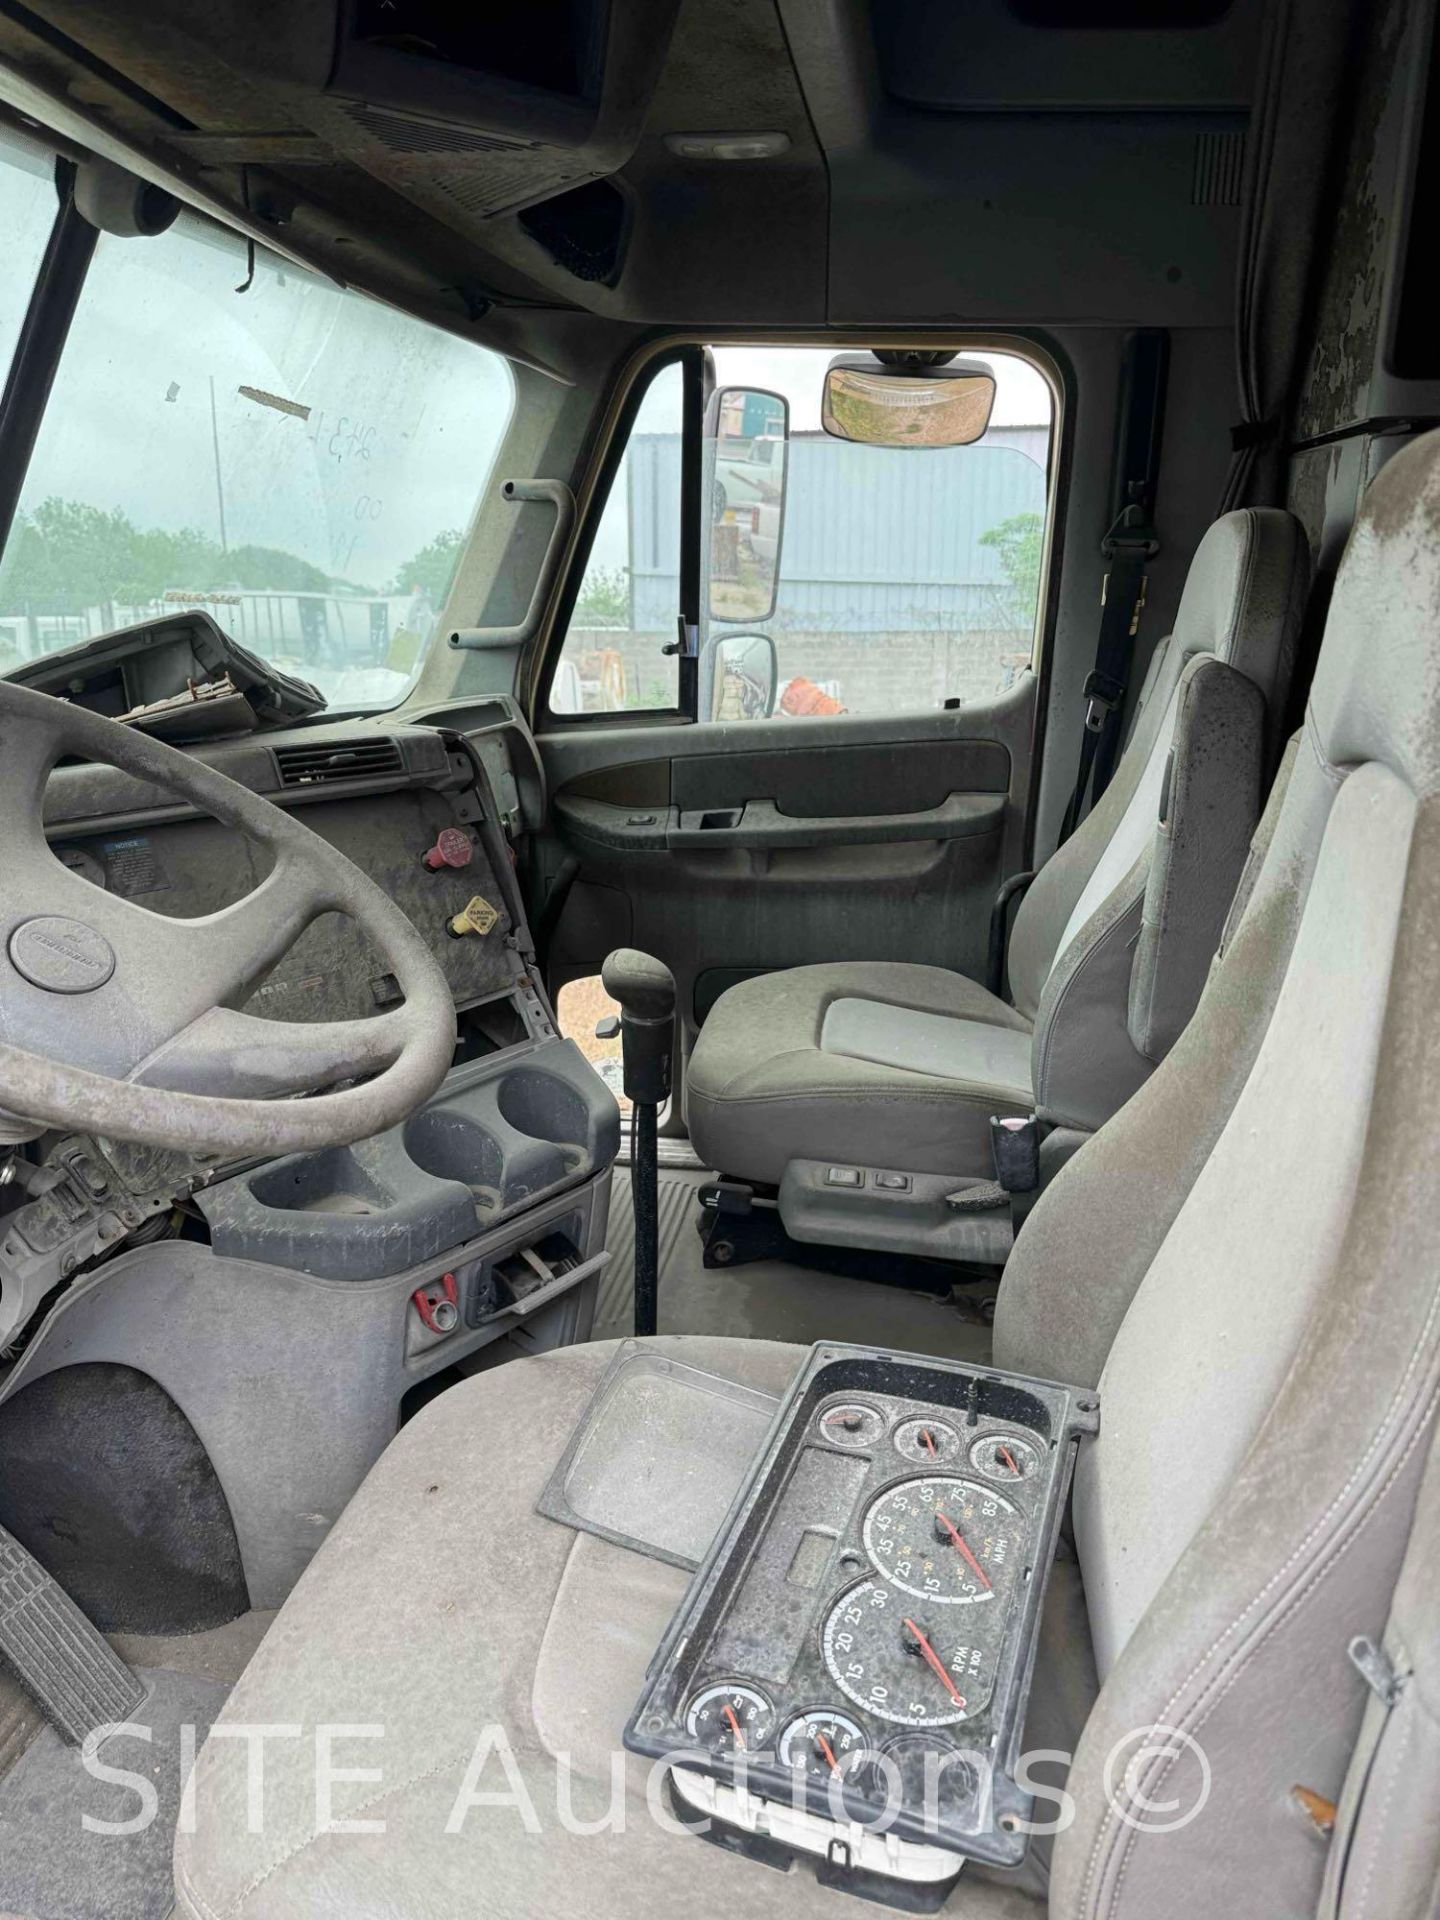 2005 Freightliner Columbia T/A Sleeper Truck Tractor - Image 5 of 30